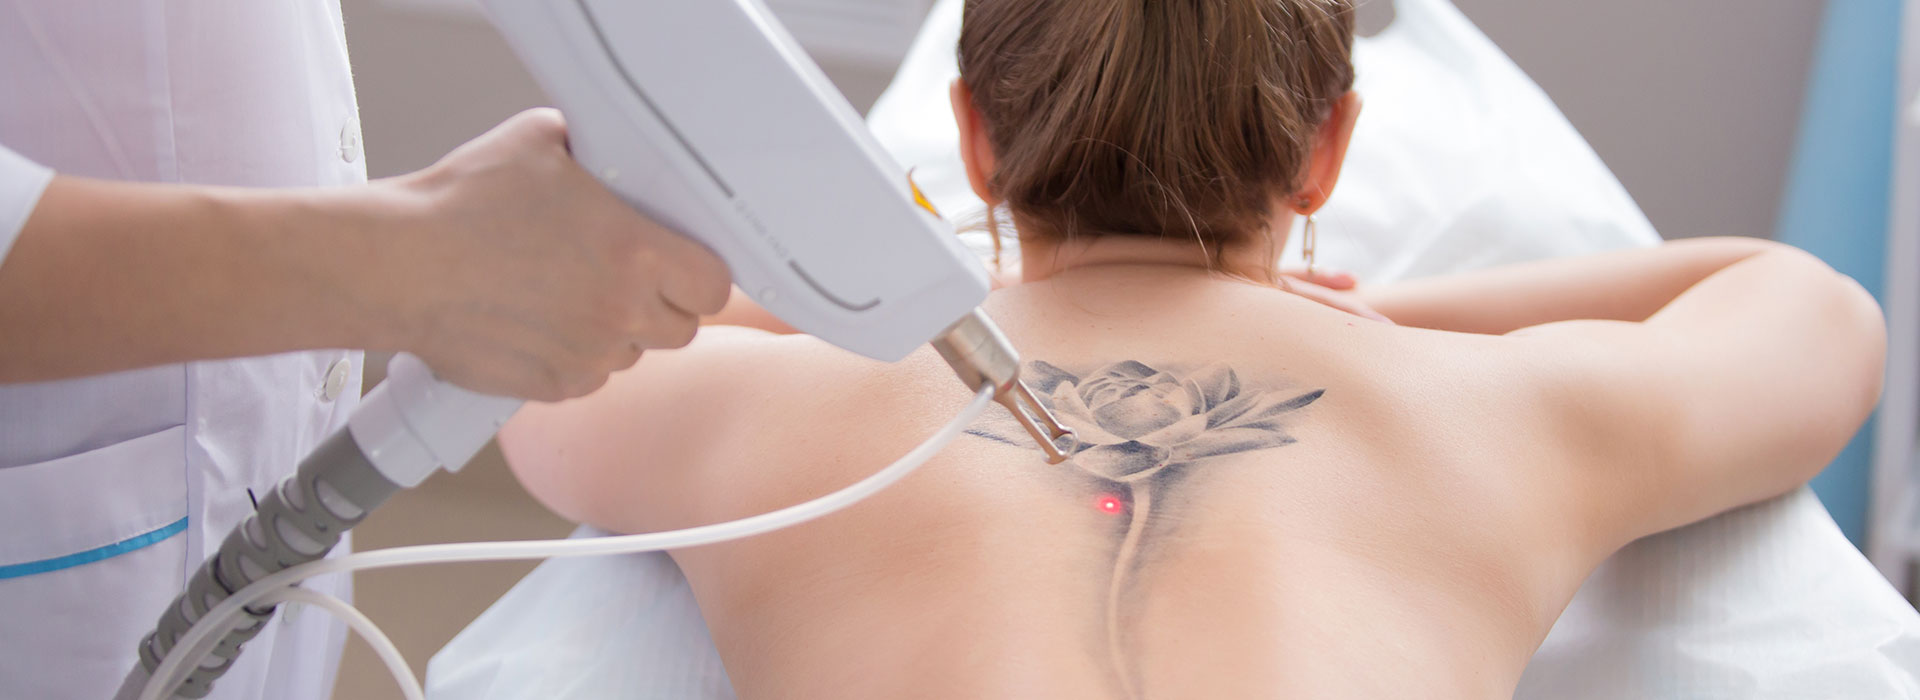 Pico Lazer Tattoo Removal at Trouvaille Med Spa in Bourbonnais, IL